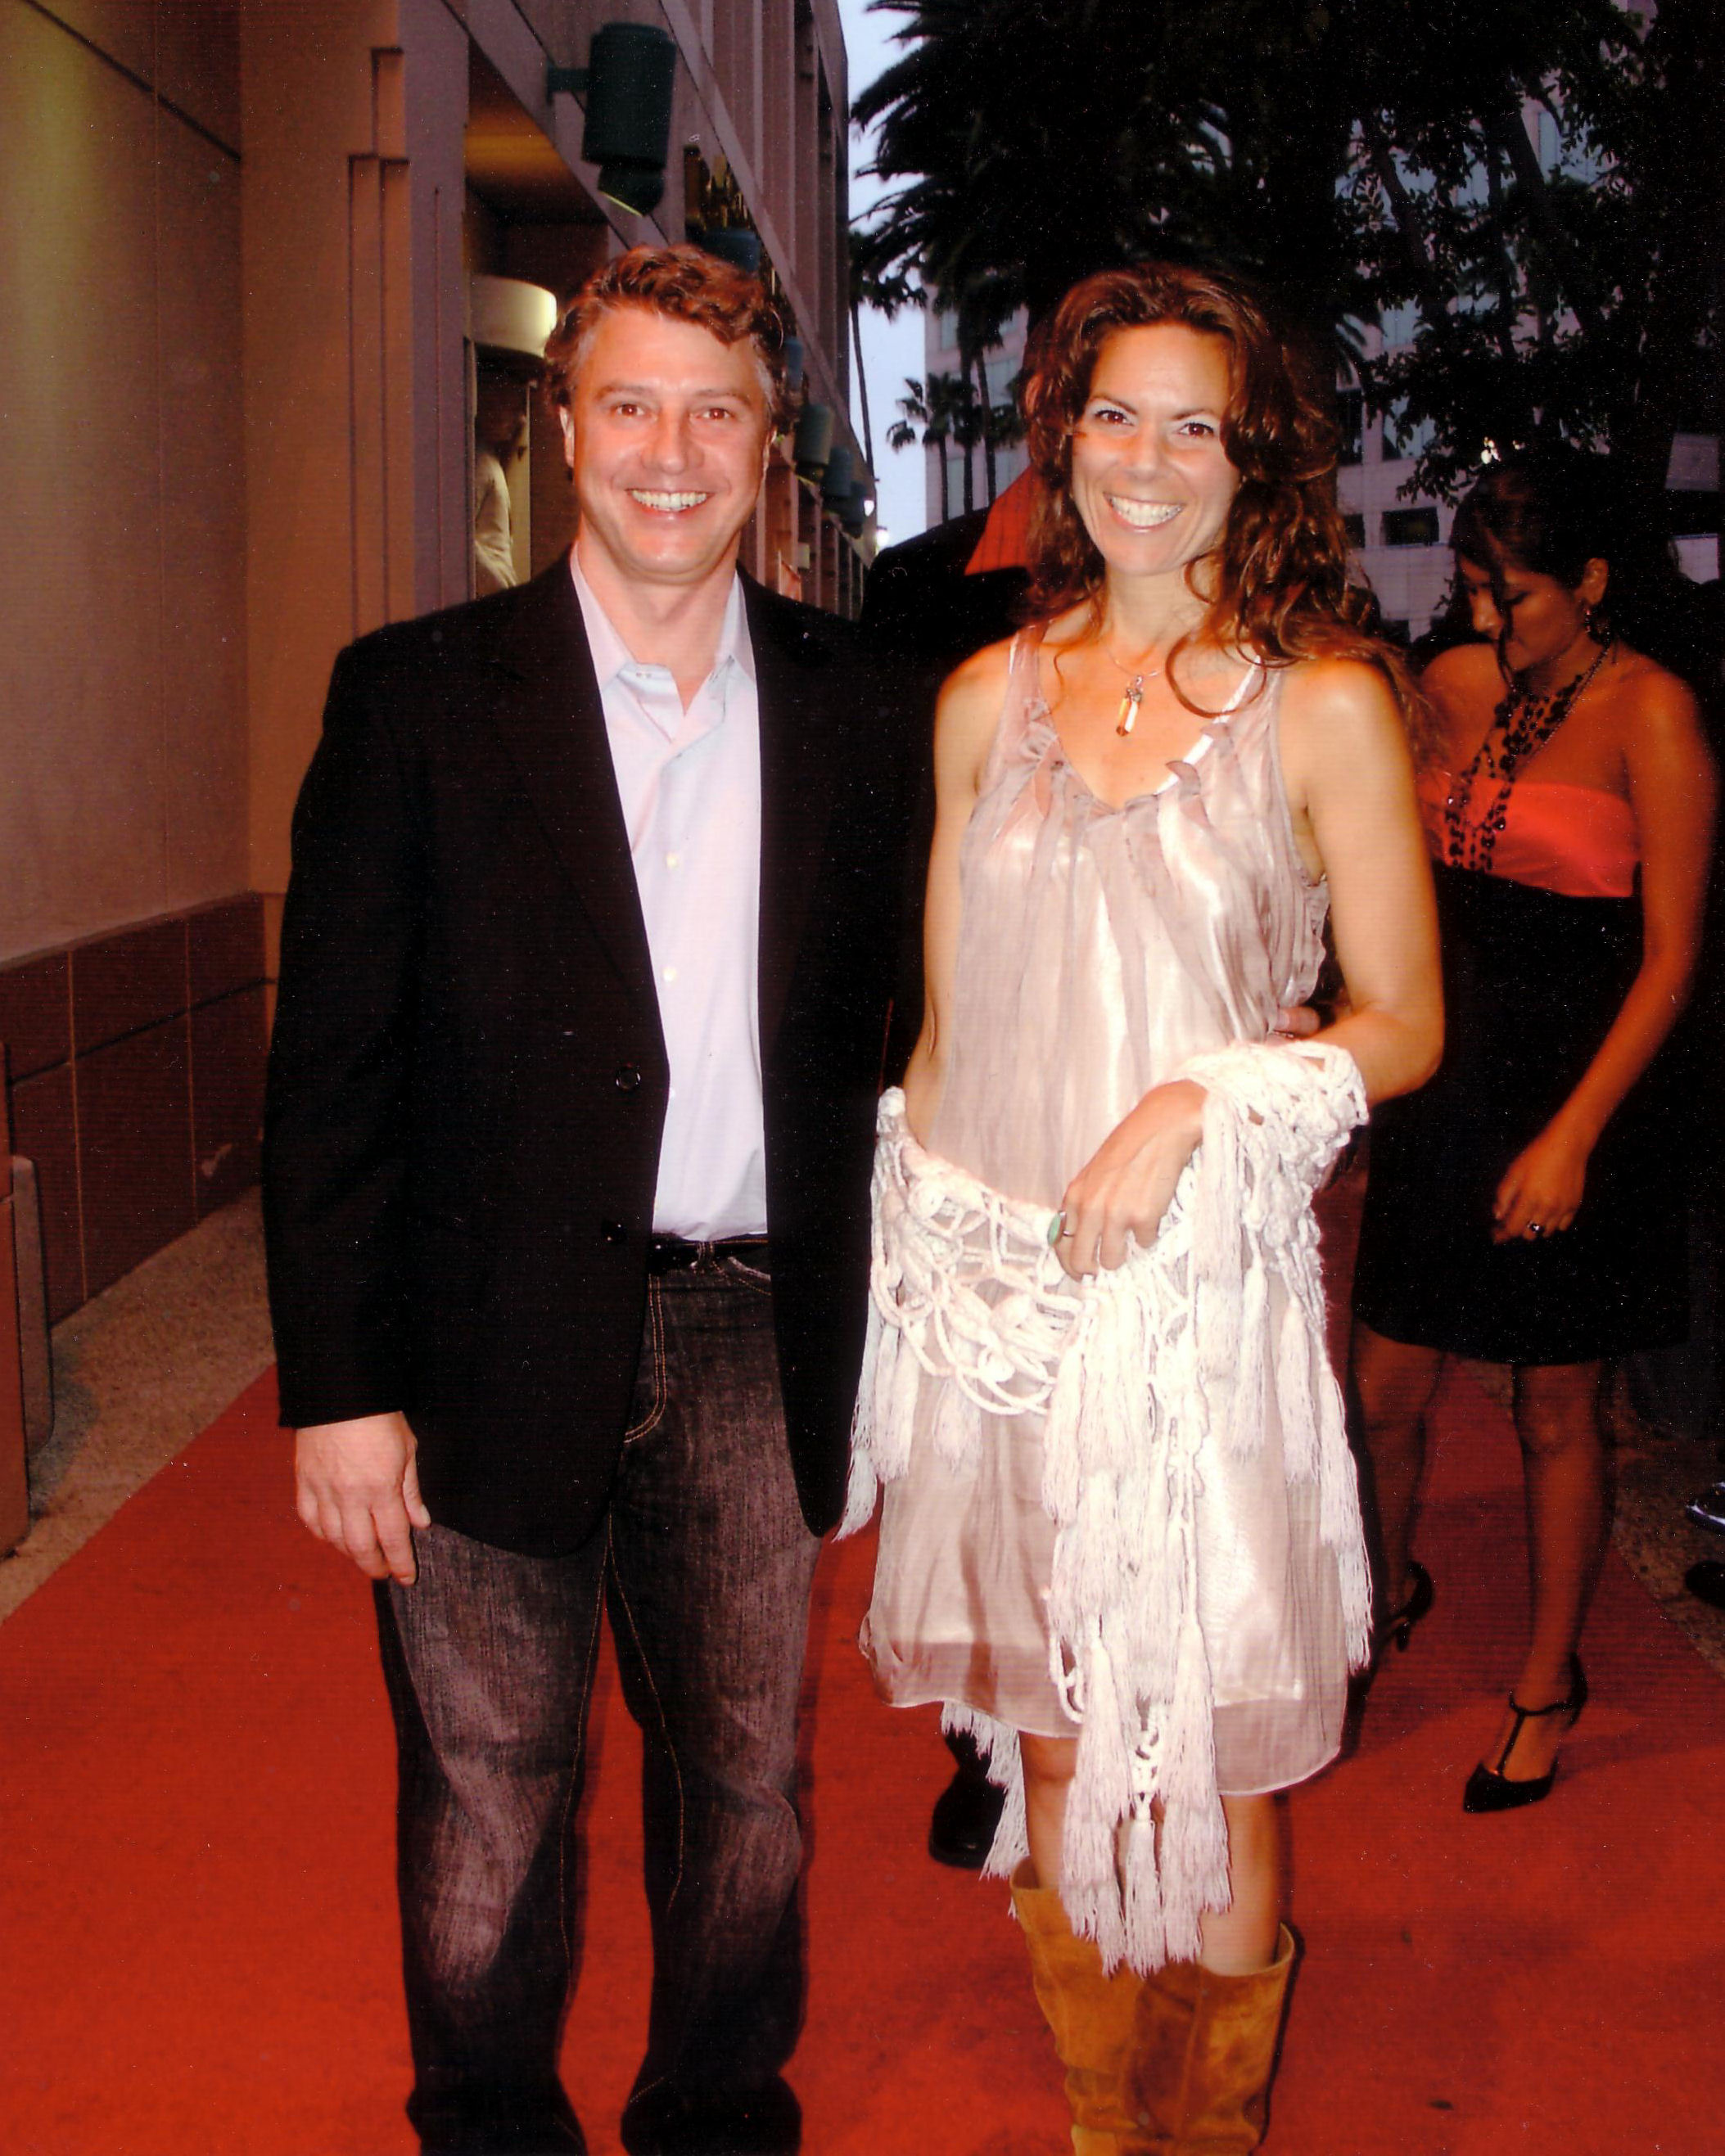 Edd Hall with girlfriend, actress Dawn Meyer, at 2009 Red Carpet premiere at the Academy of Television Arts & Sciences in Studio City, CA.